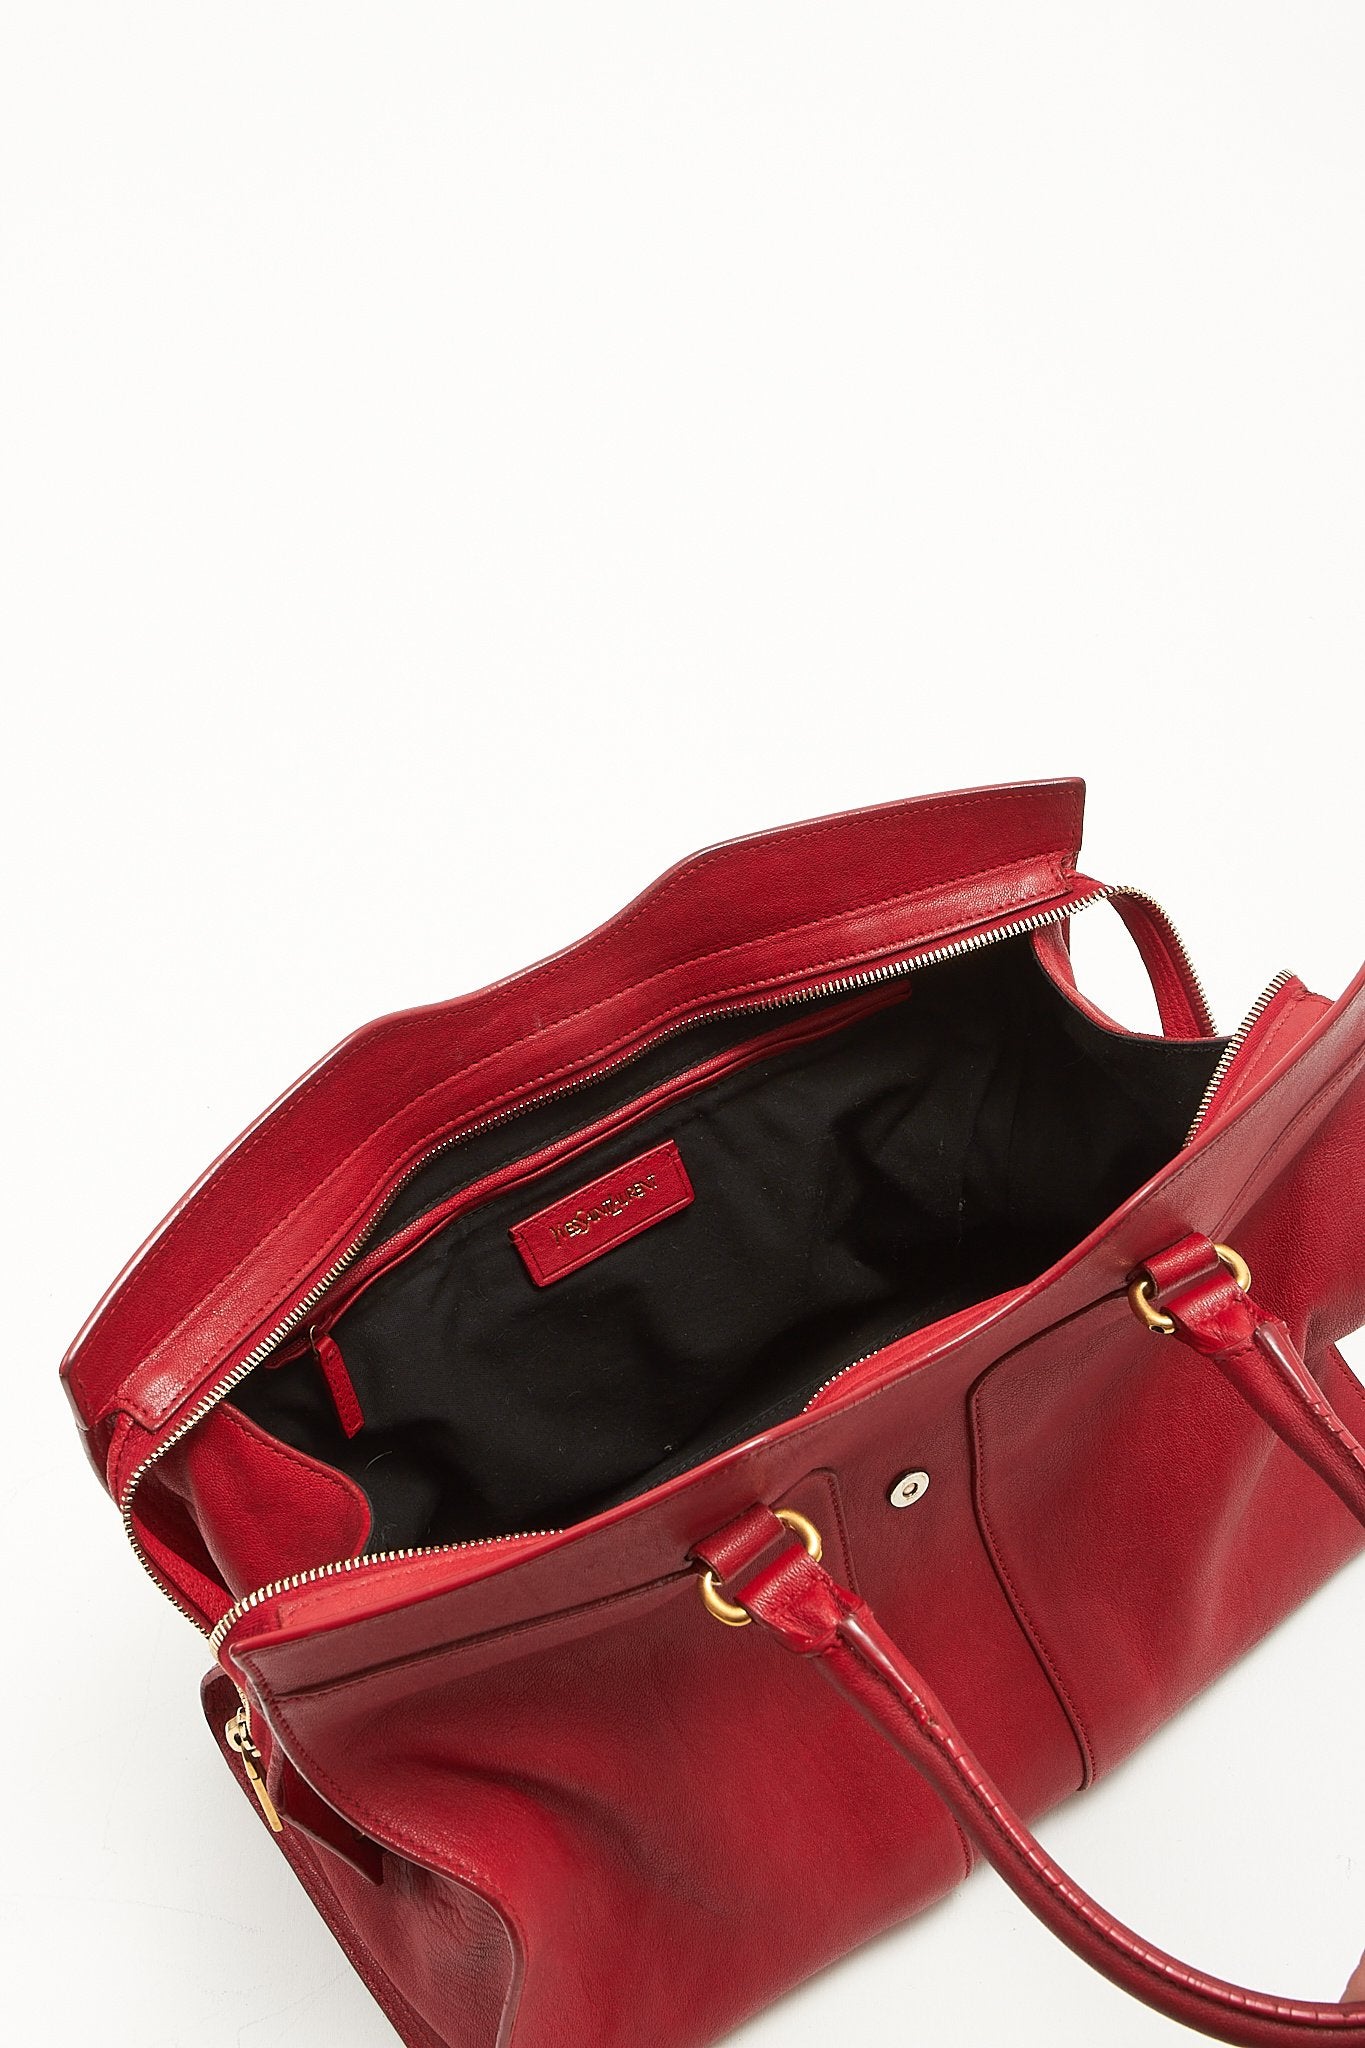 Saint Laurent Red Leather Medium ChYc Cabas Tote